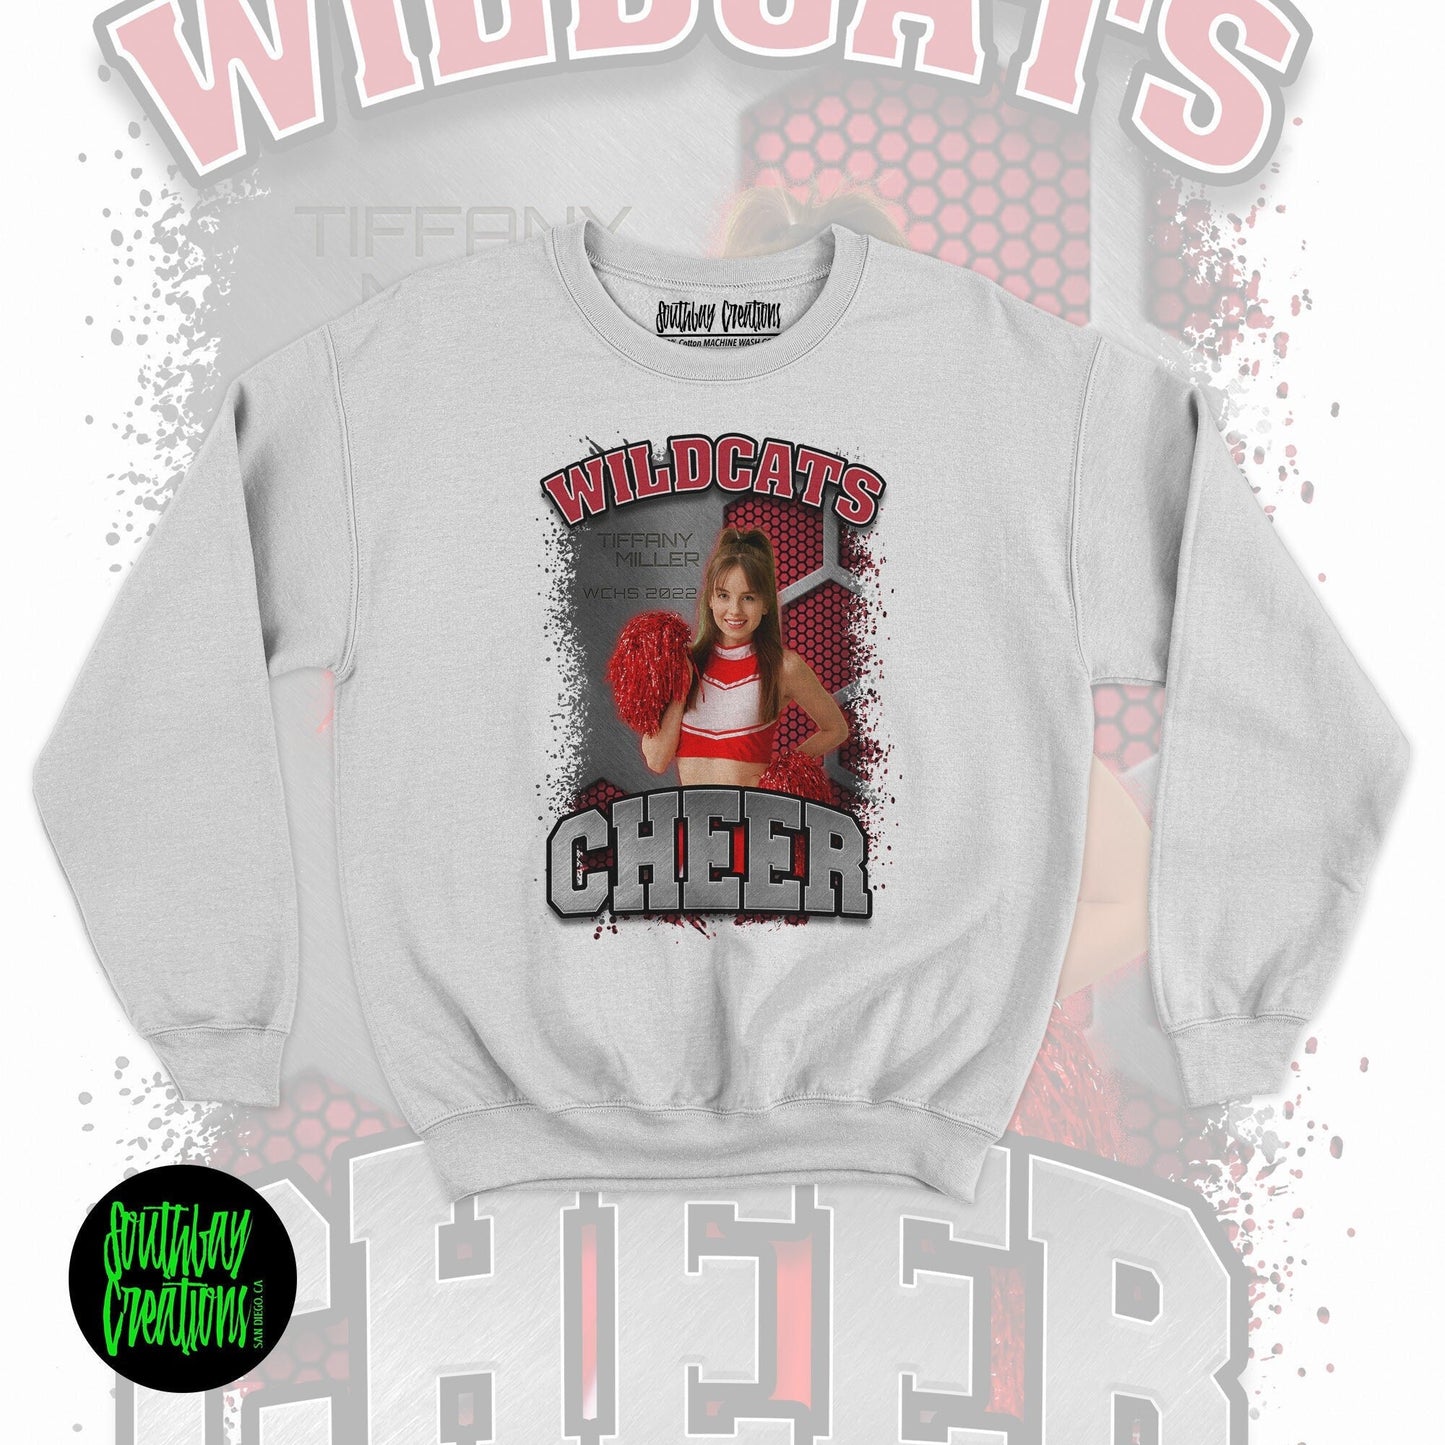 Personalized Cheerleader Picture Sweatshirt for Game Day, Custom Photo Crewneck, Senior Gift, Cheerleader Mom, Dad, Sister, Aunt and Brother